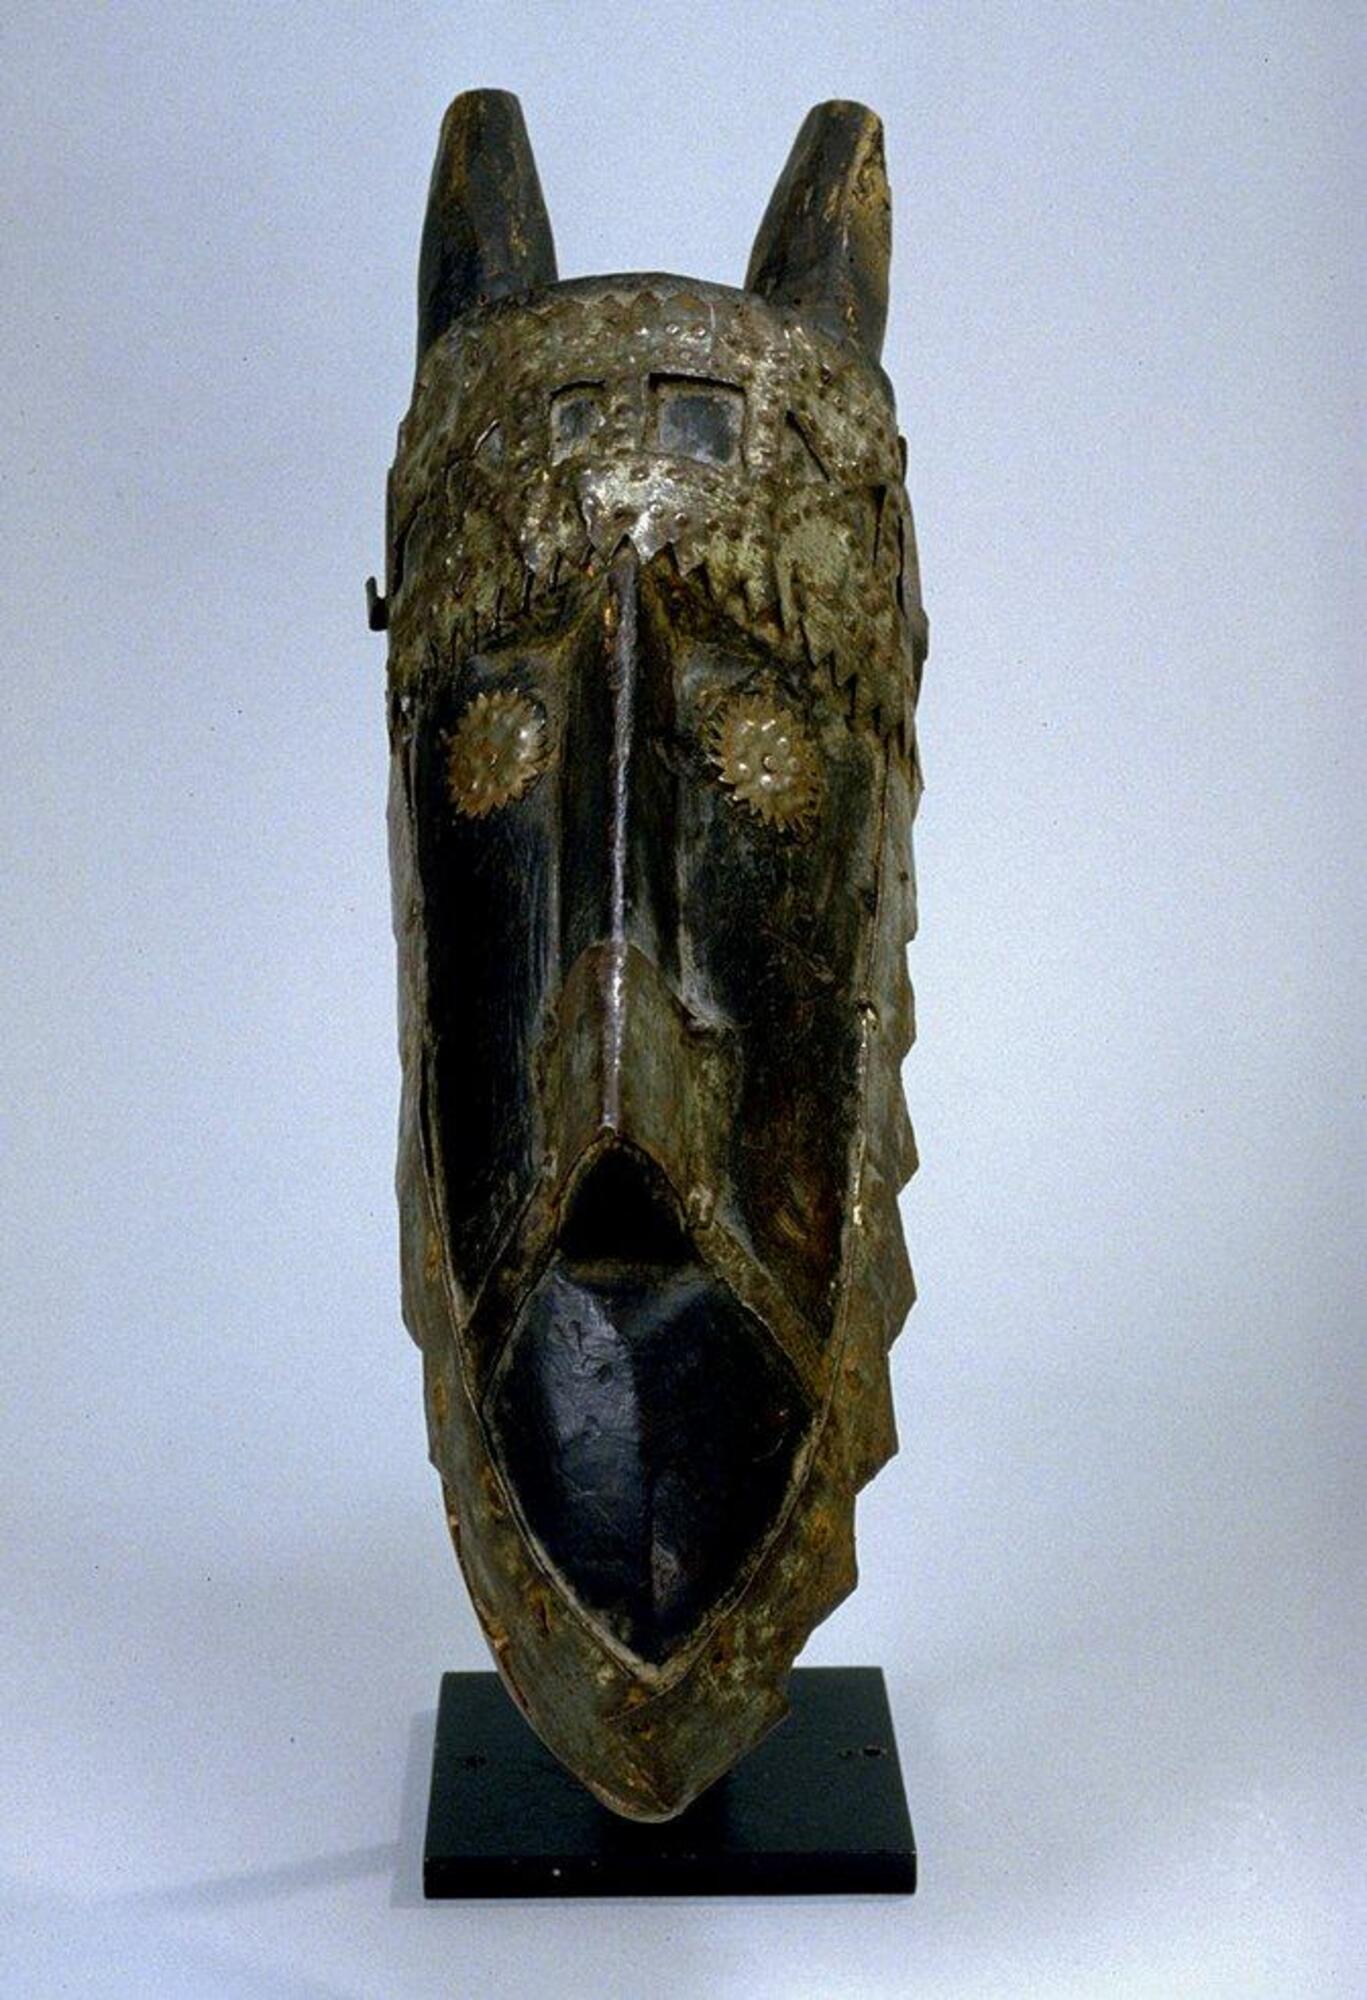 Stylized wood carving of hyena head;  two pieces of wood joined to form articulating jaw. edged with prominent teeth. short upright ears, long triangular nose or snout; eyes, teeth, nose and crown of head overlaid with sheet metal. Wood is unpainted.